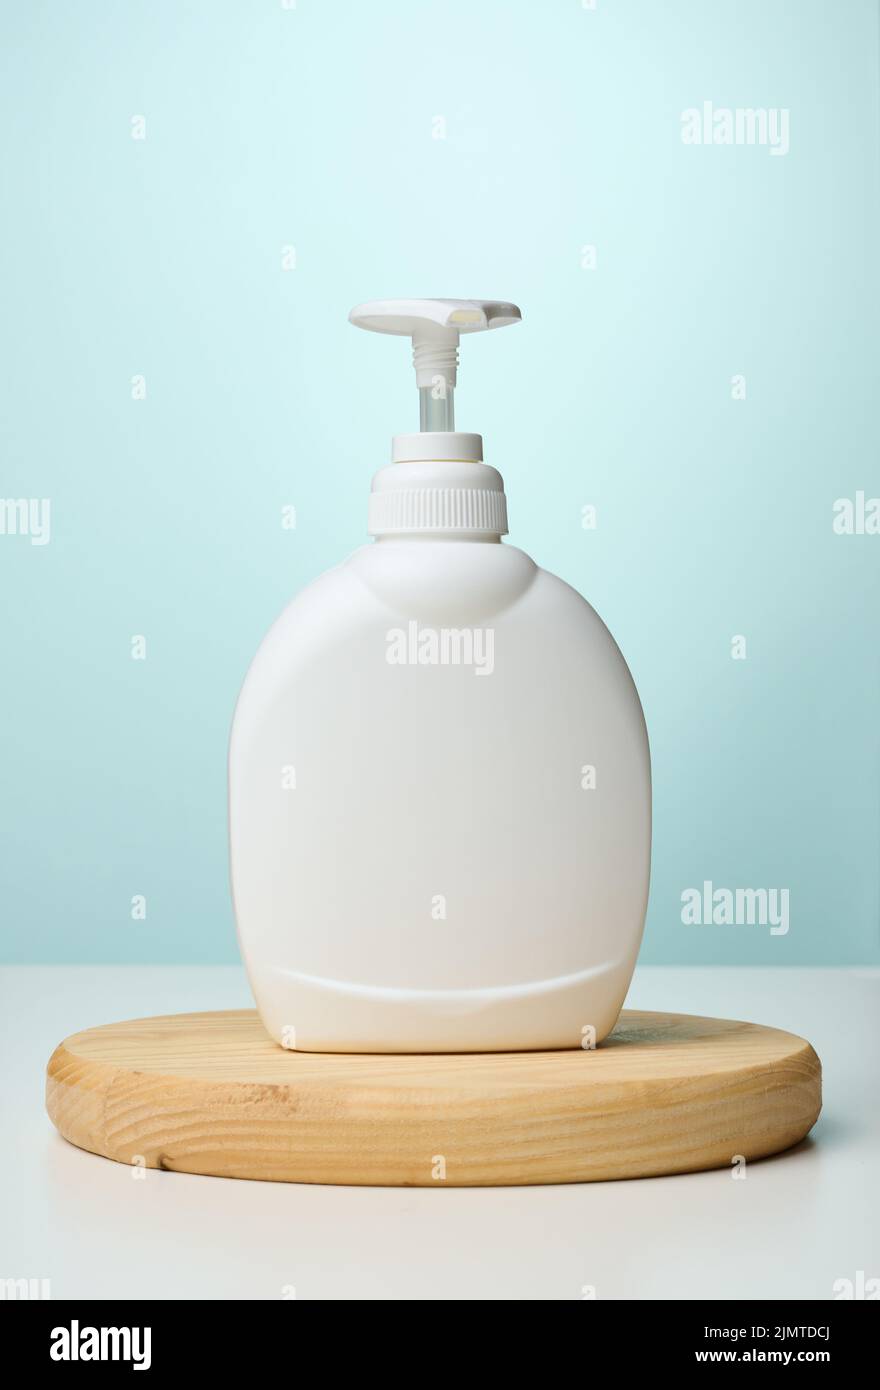 https://c8.alamy.com/comp/2JMTDCJ/white-plastic-container-with-a-pump-for-cosmetic-liquid-liquid-soap-on-the-table-2JMTDCJ.jpg